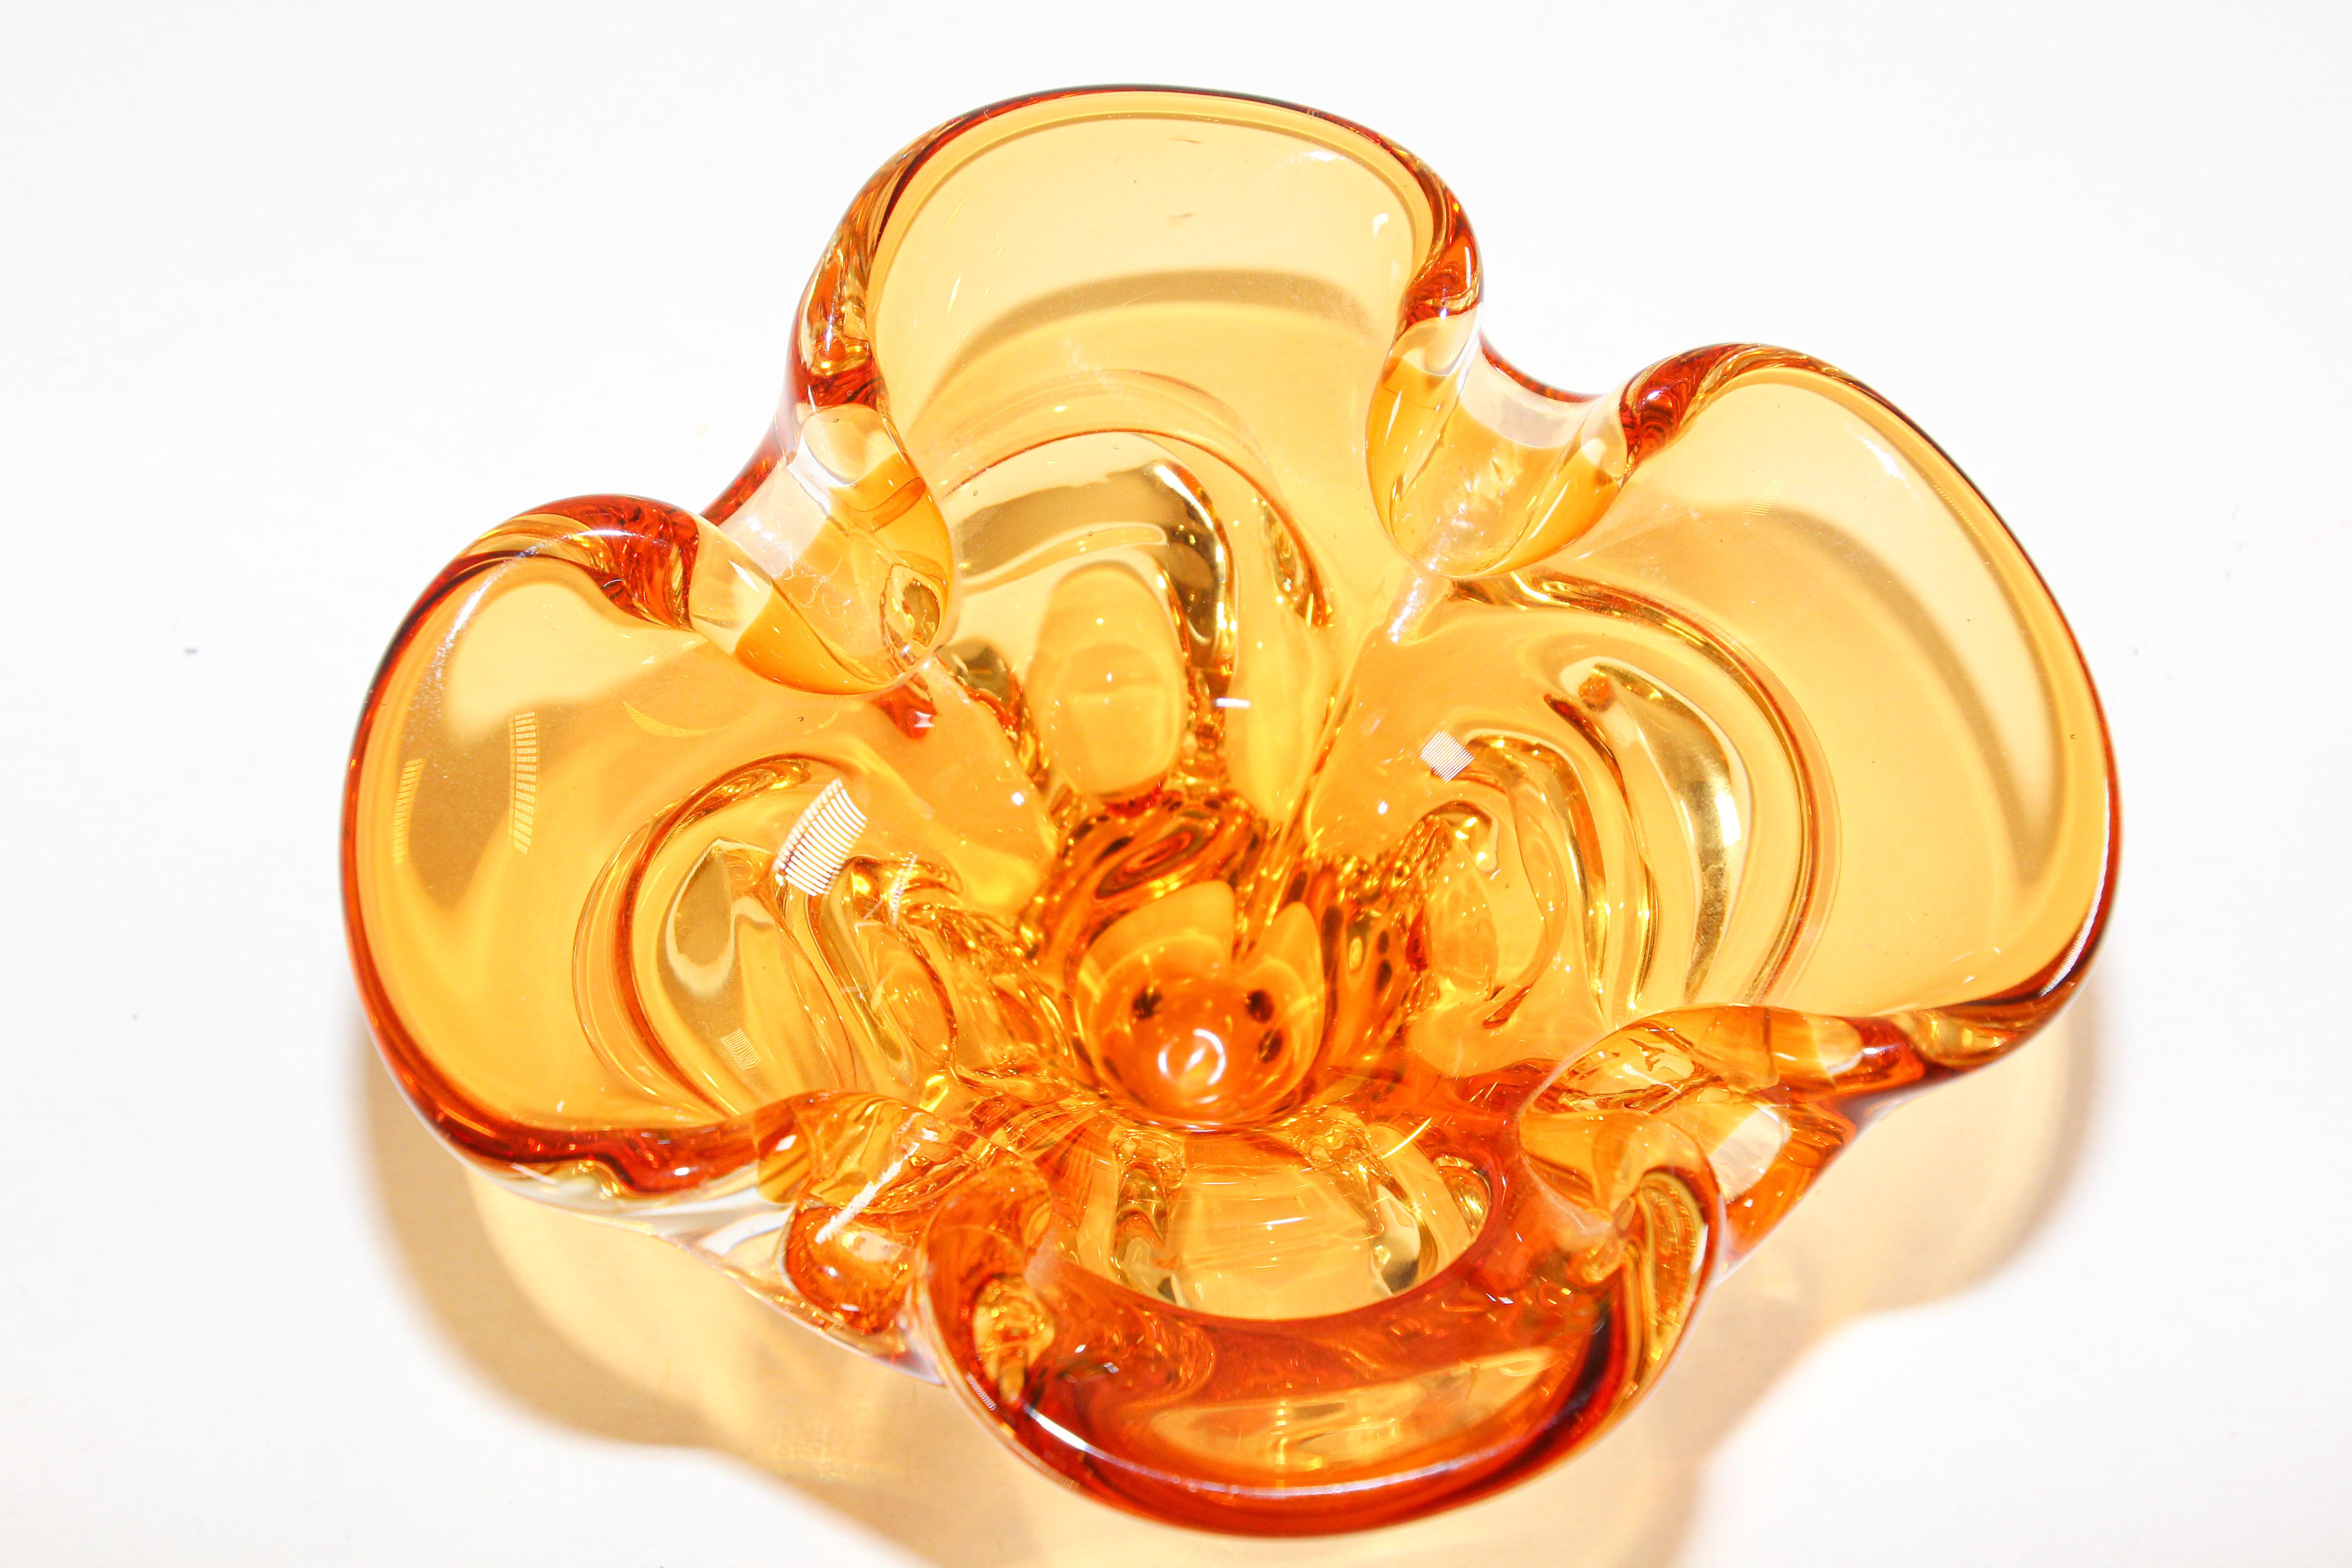 Gorgeous vintage amber and gold Murano Venetian style hand blown art glass decorative bowl.
This stunning bowl is a true objet d'art and can be used as a striking sculptural decoration.
Sculptural art glass organic form with beautiful gold and